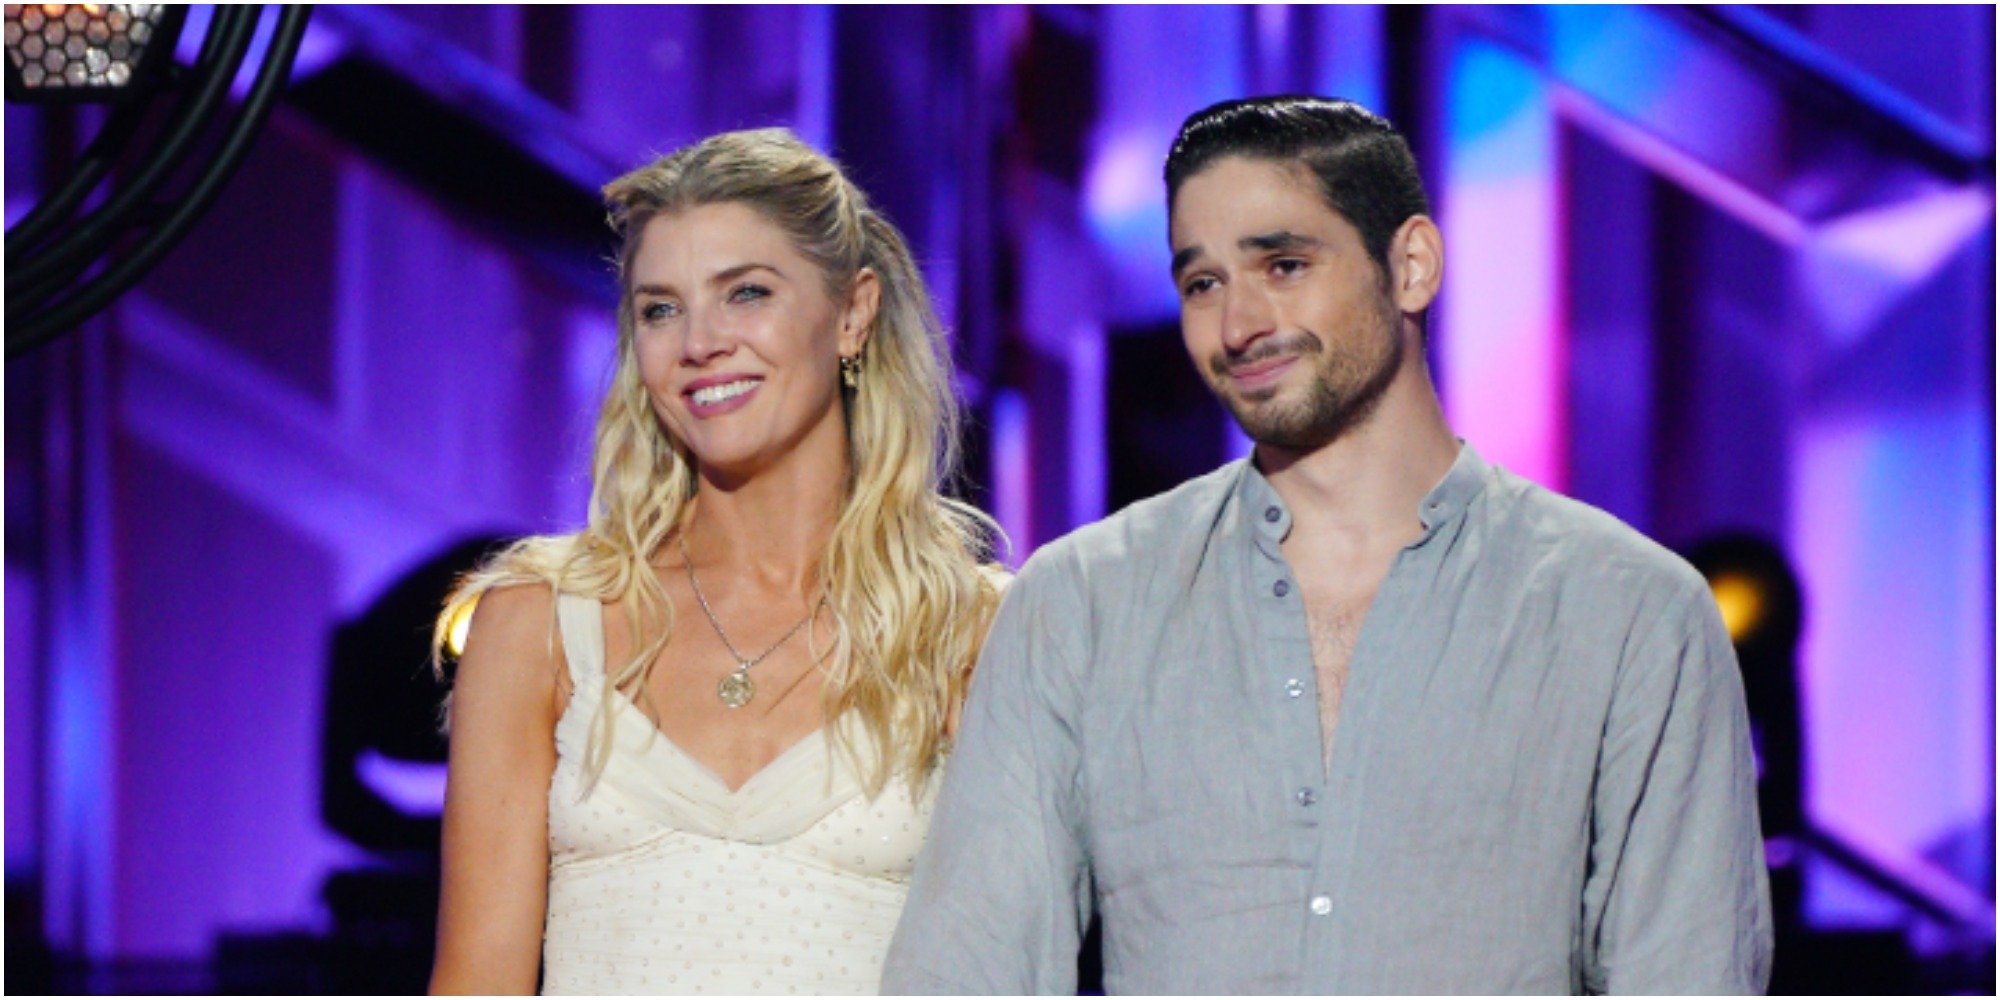 Amanda Kloots and Alan Bersten get their scores from judges on "Dancing with the Stars."